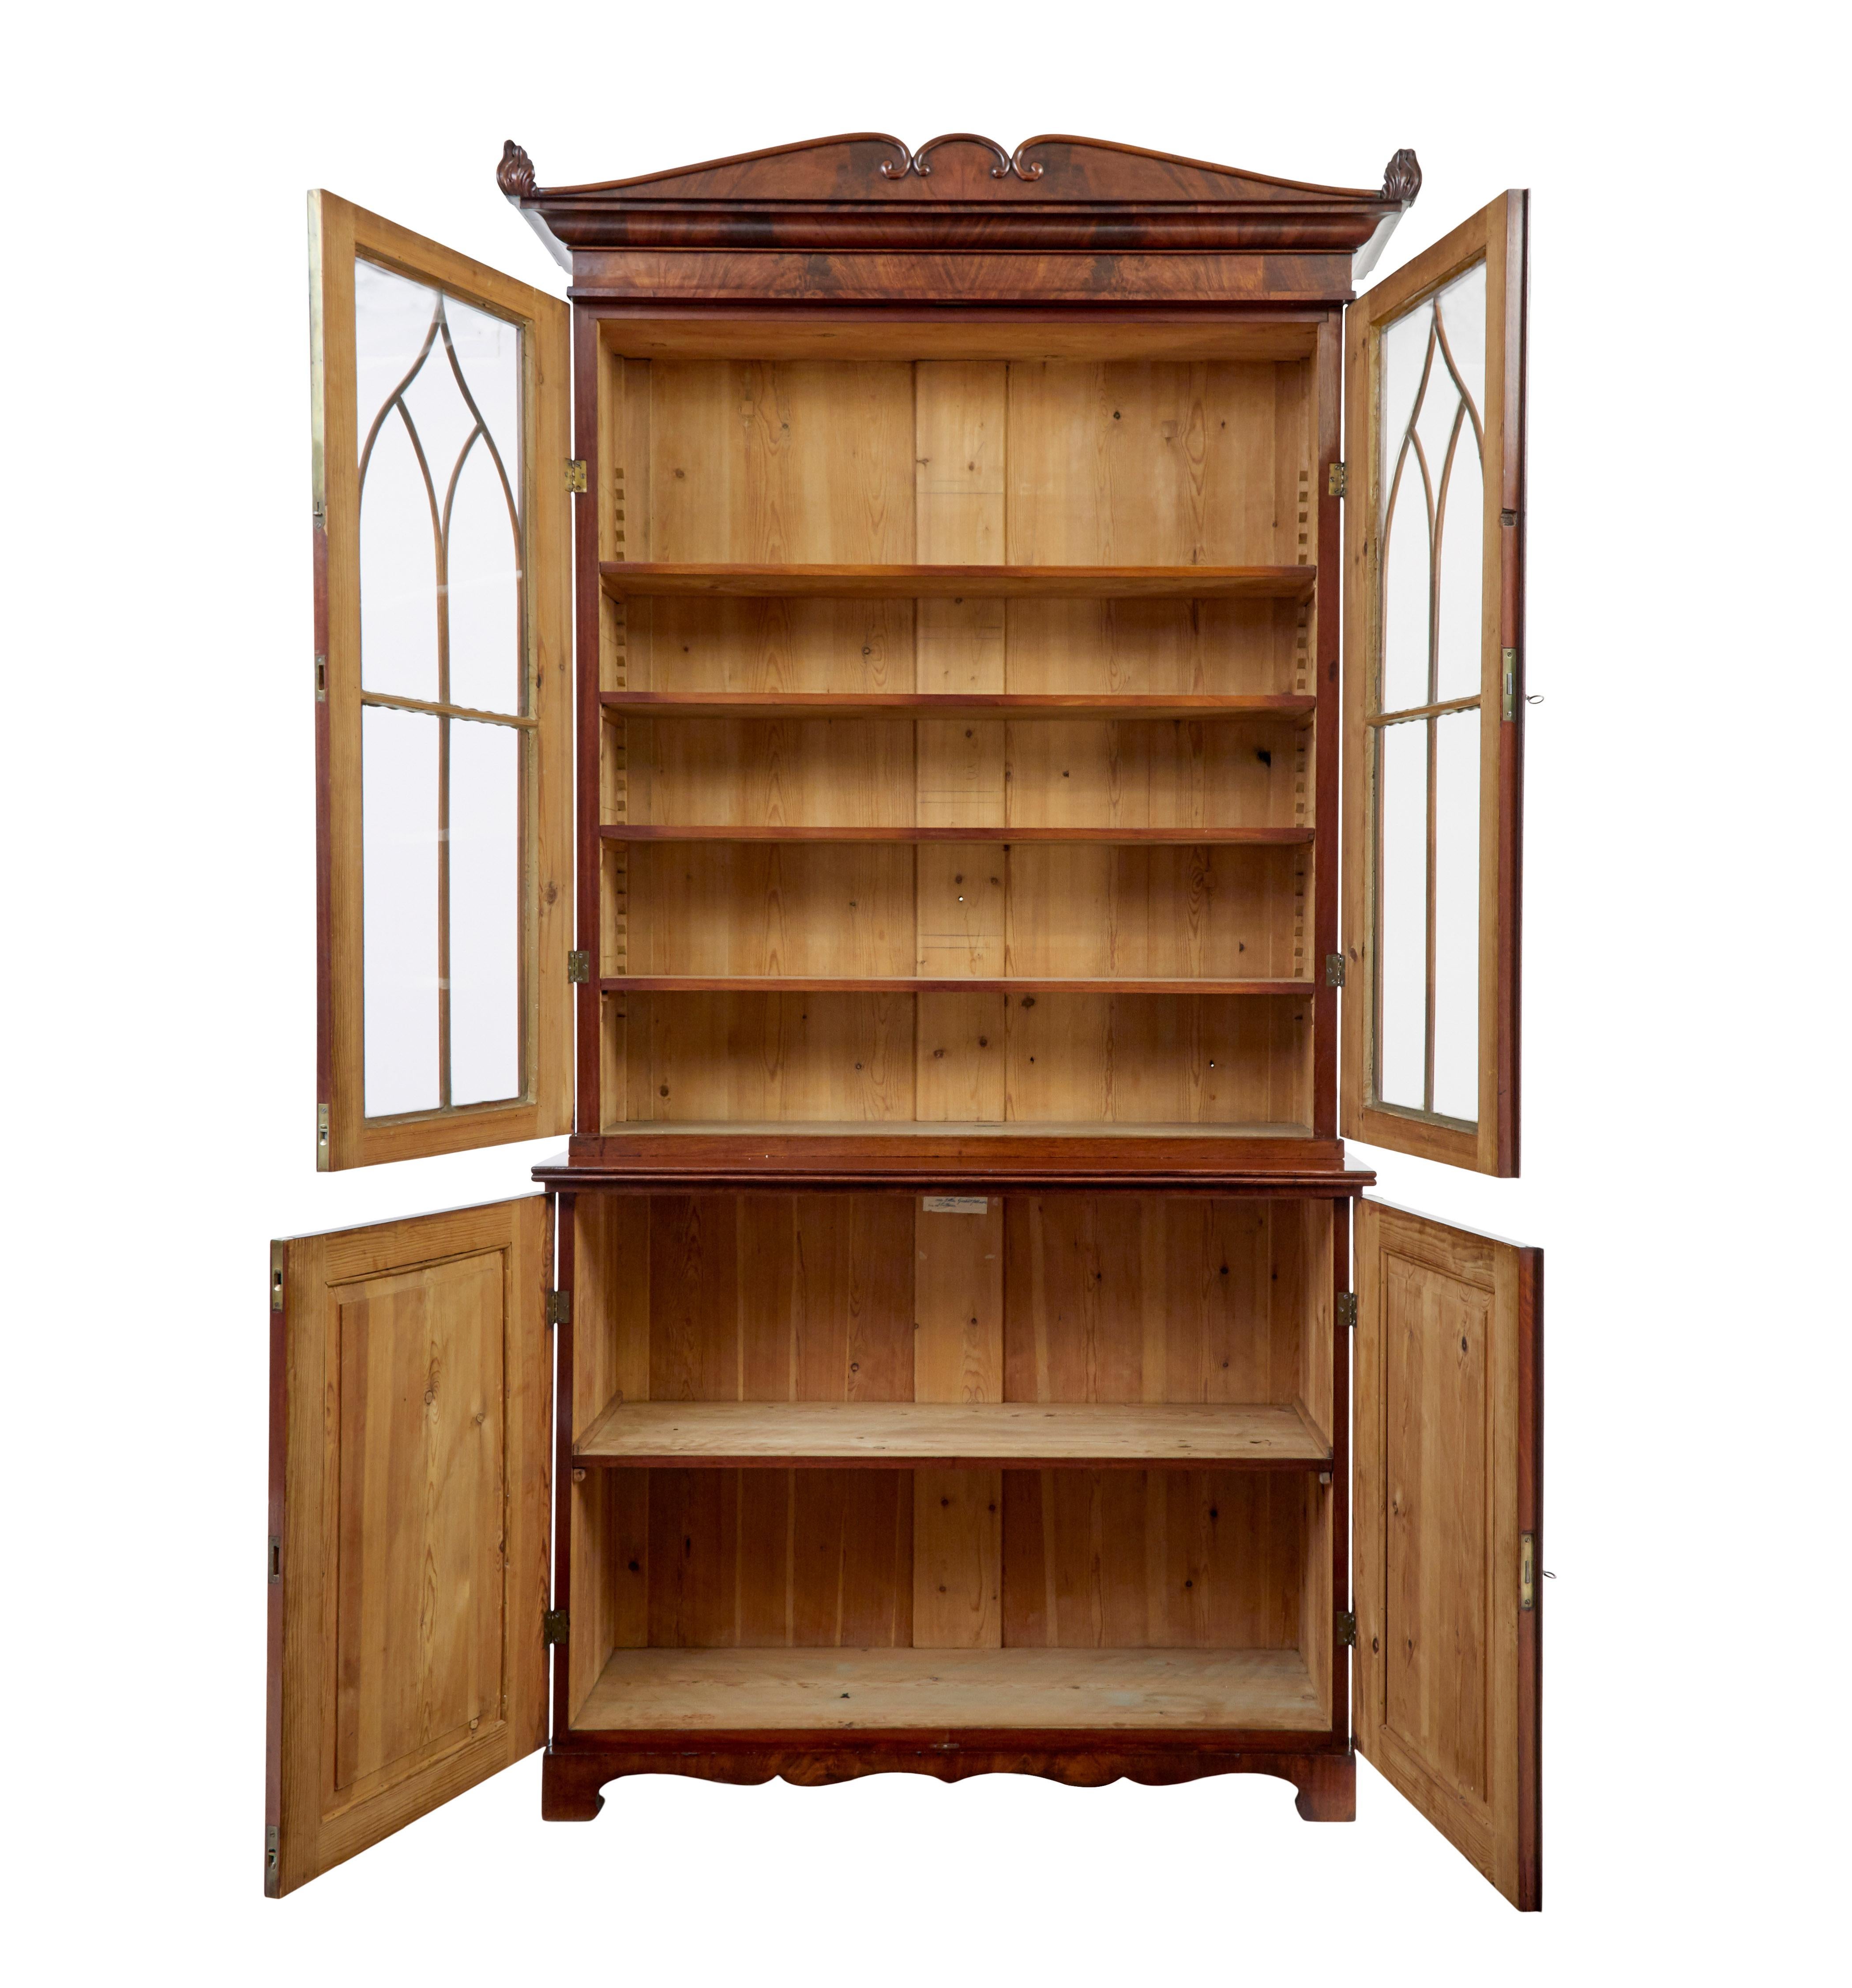 Fine example of a regency period bookcase circa 1820.

Very much in the manor of Thomas Hope.  Matching flame mahogany veneers from top to bottom.  Comprising of 3 sections, lower cabinet, glazed cabinet and removable cornice.

Shaped cornice with